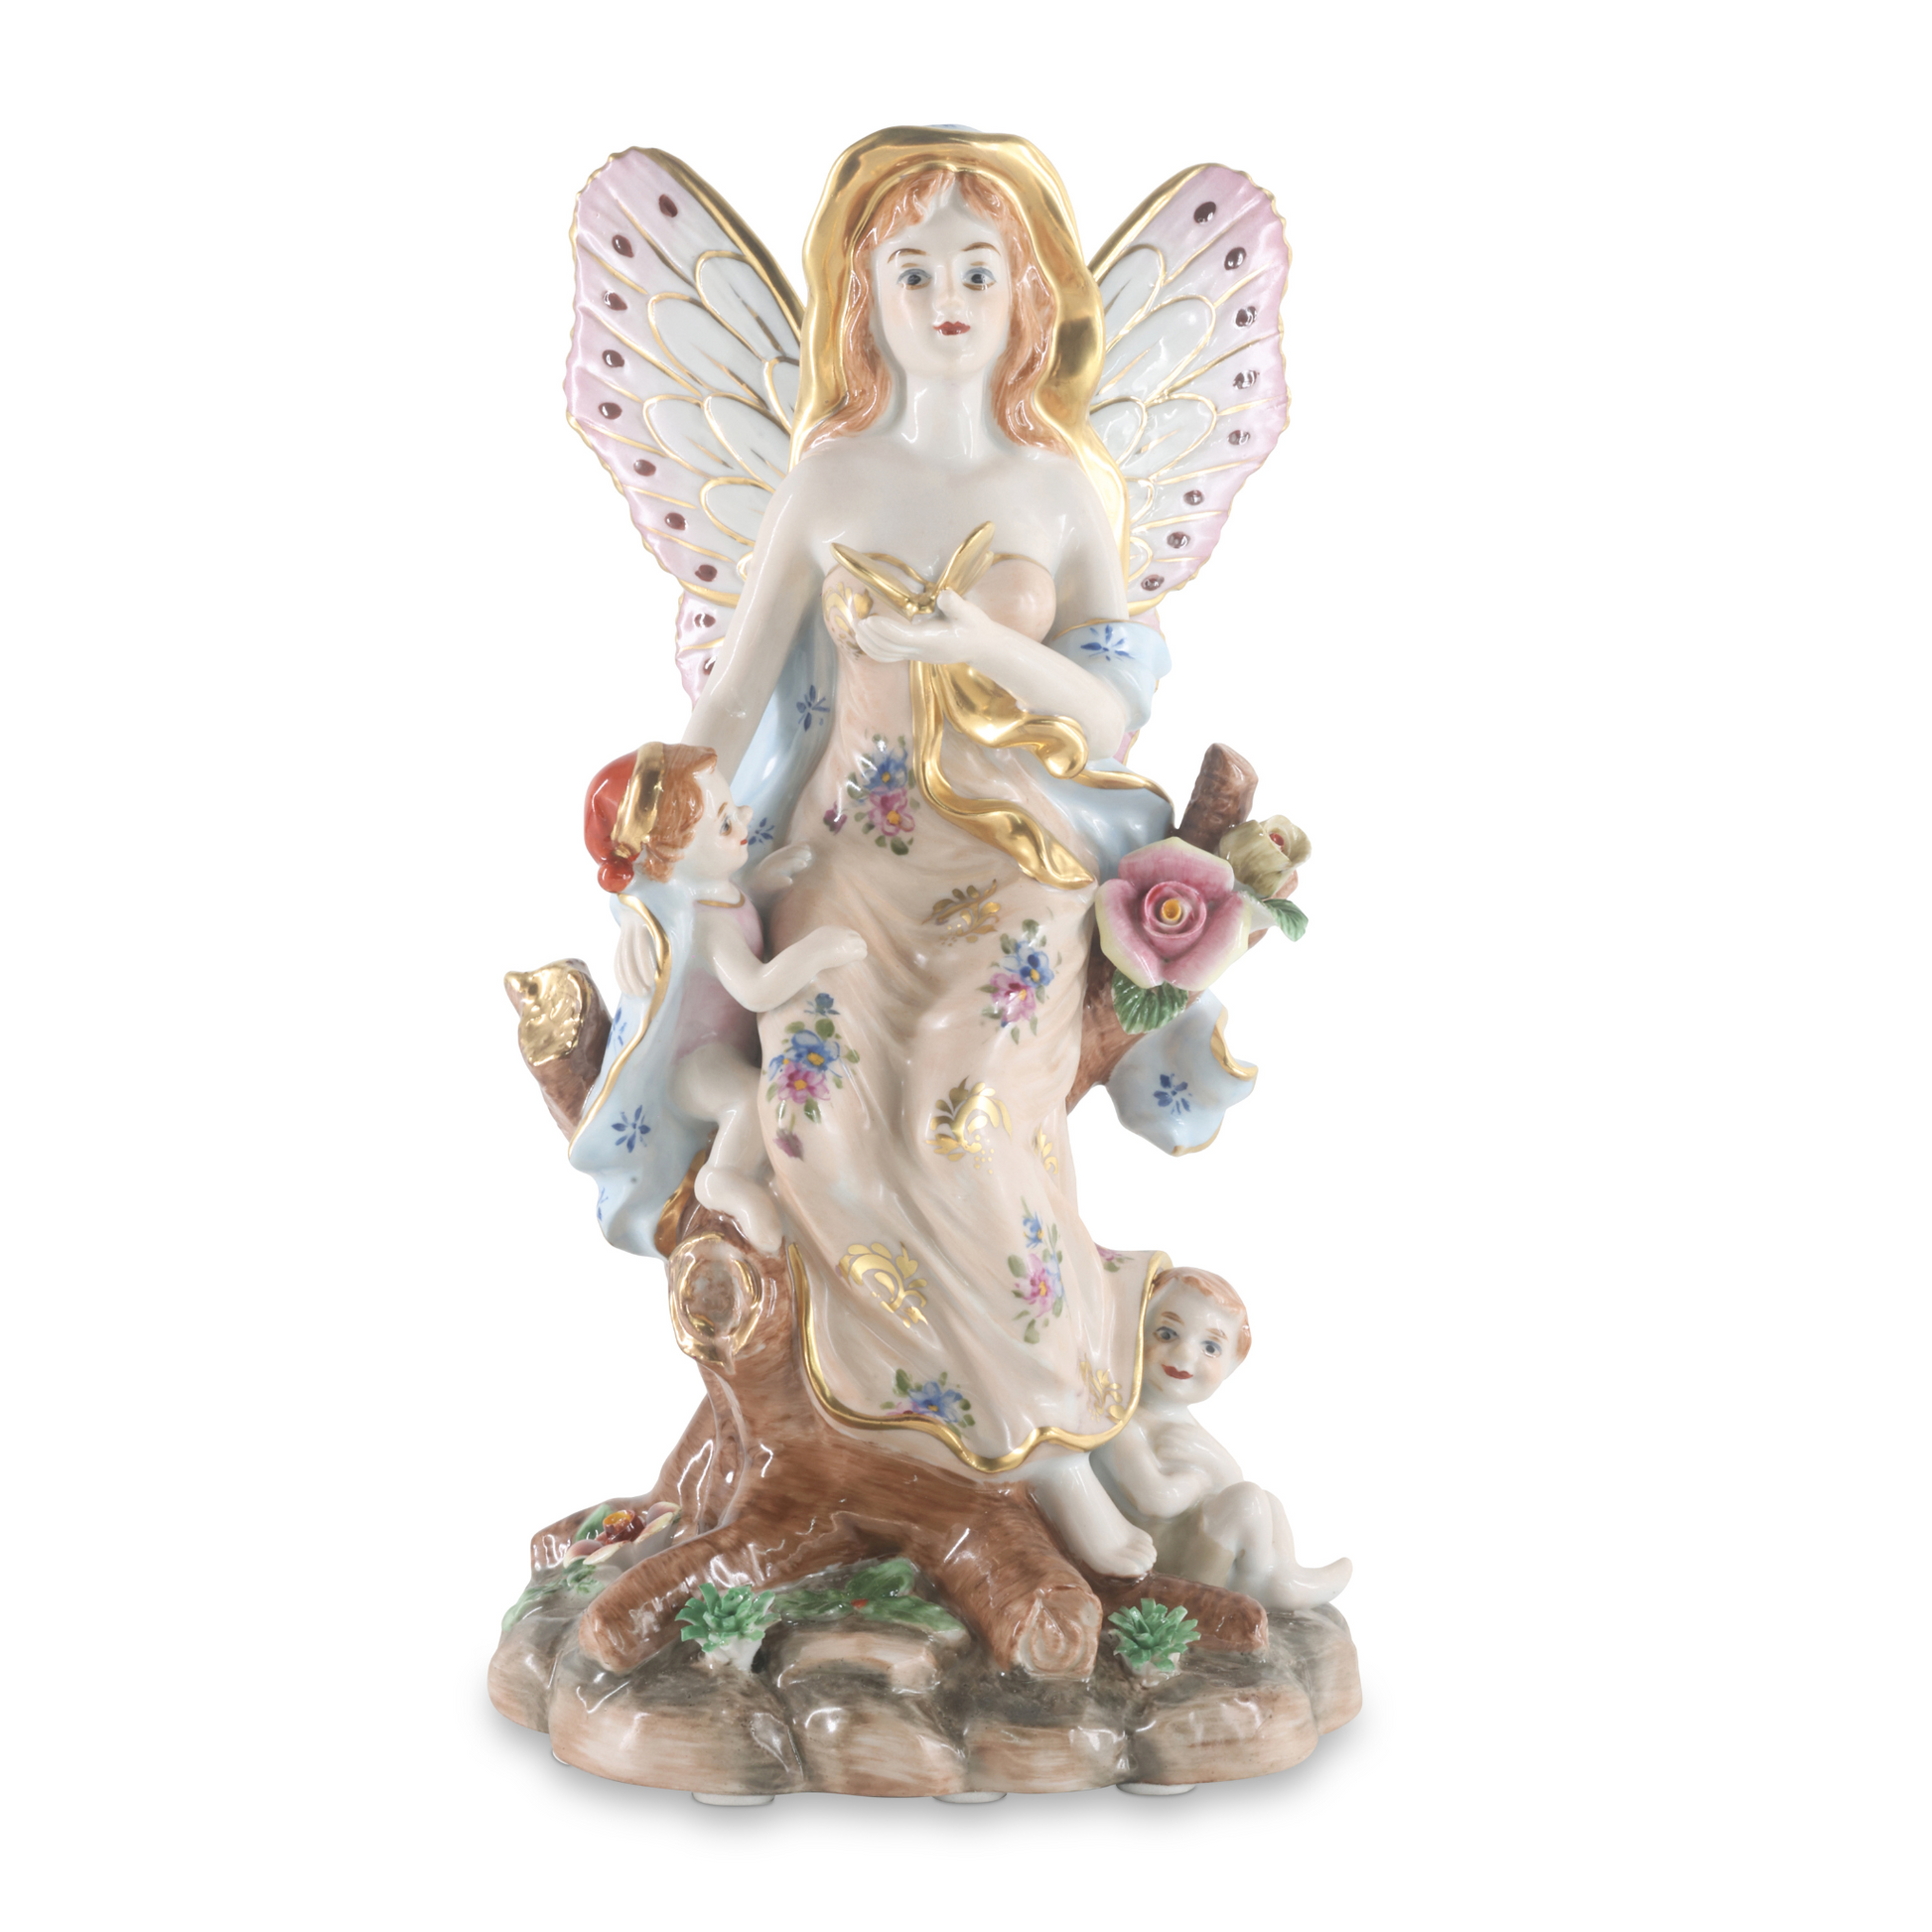 Hand-painted porcelain figurine in Rococo style